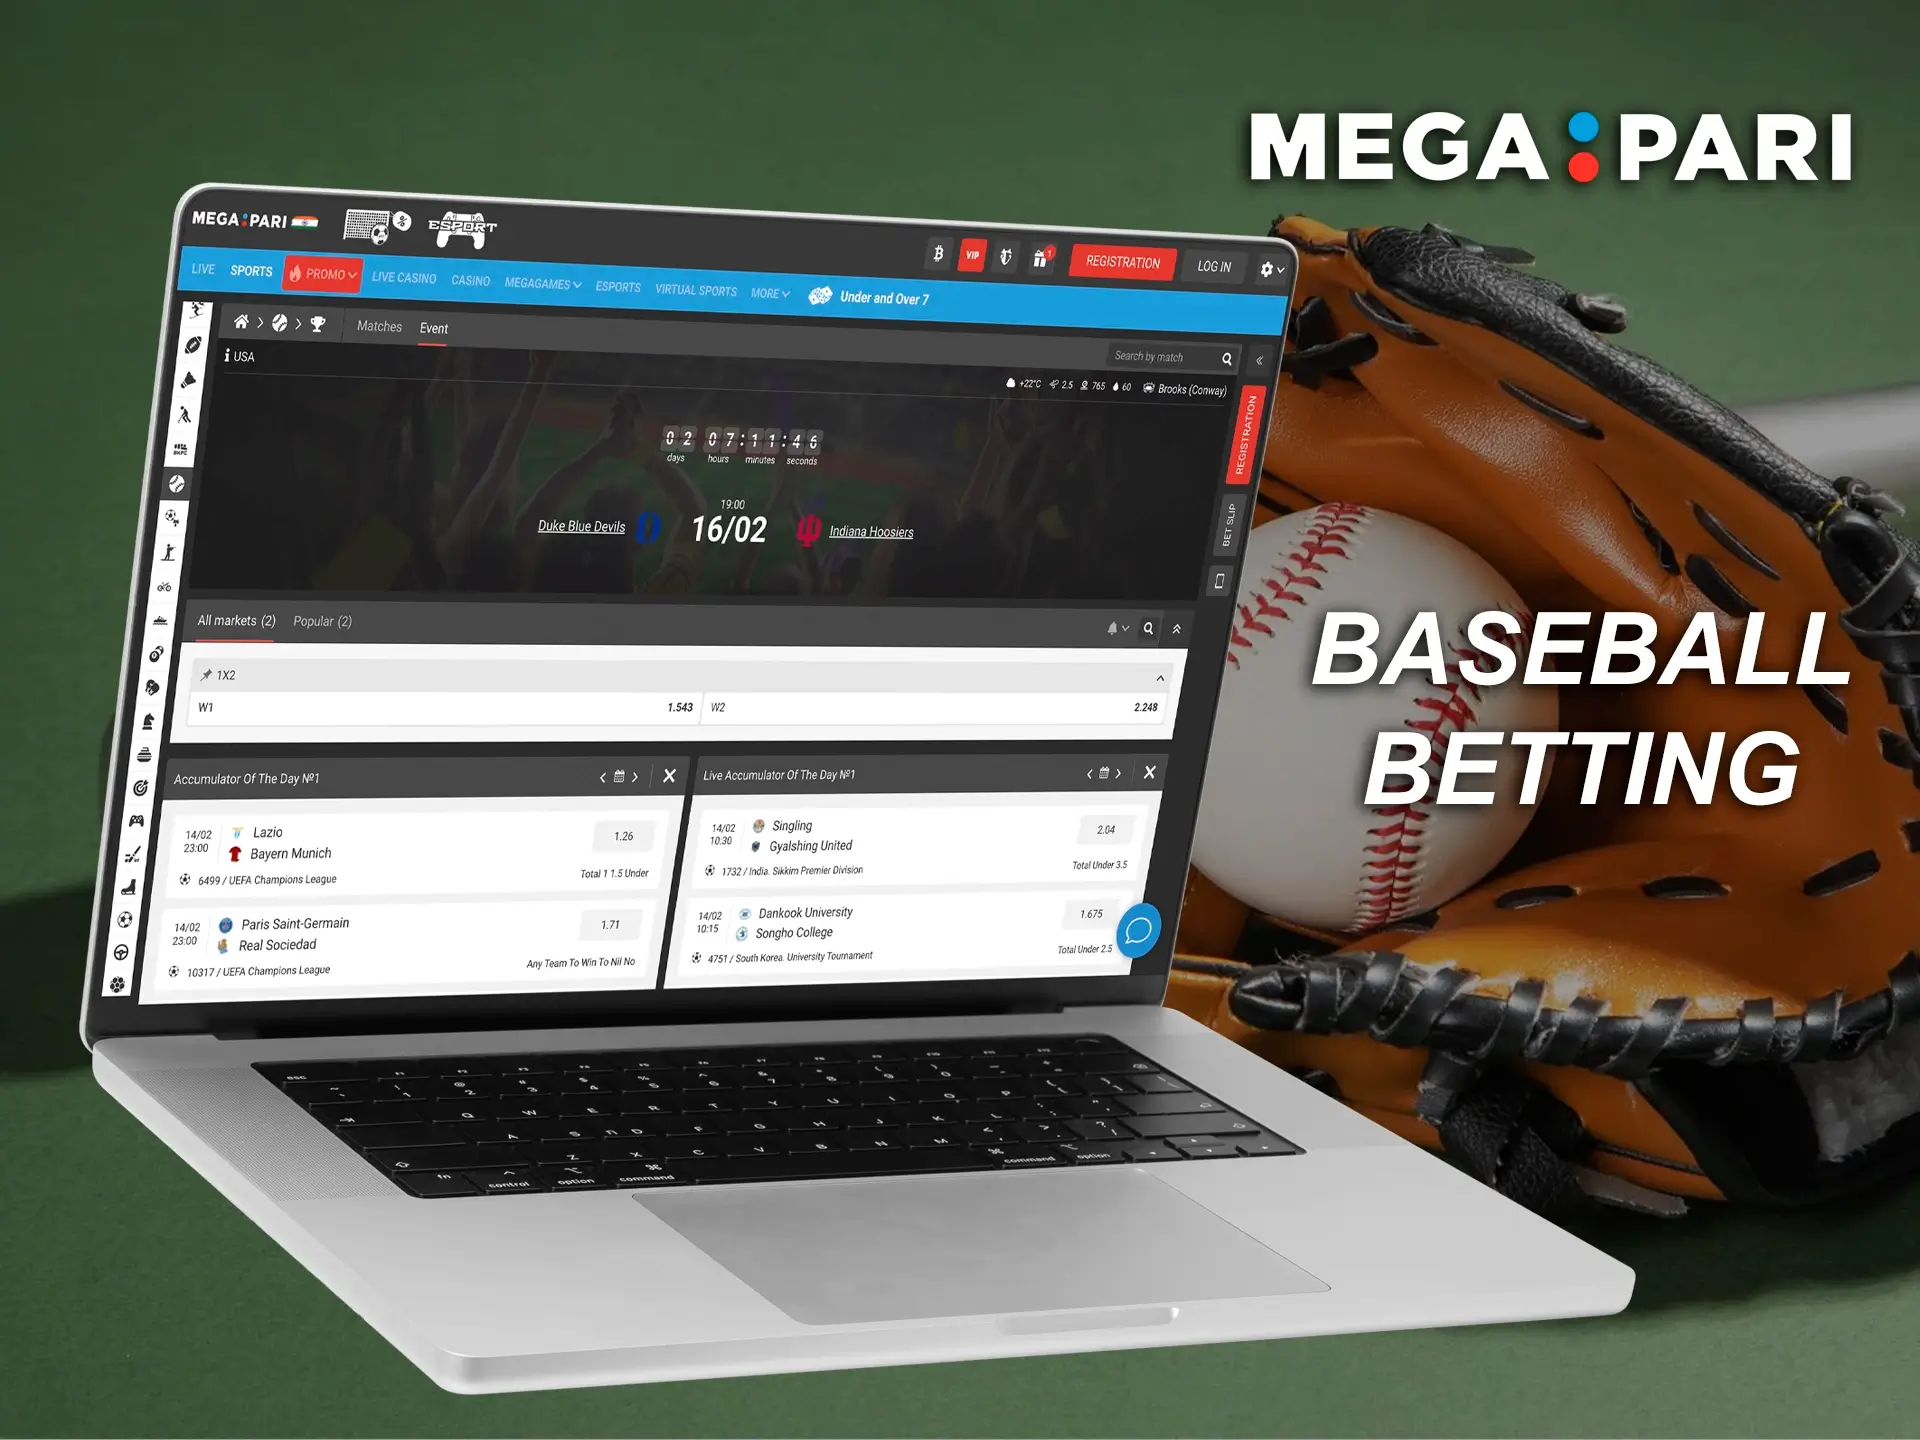 Megapari's large selection of baseball betting options allows customers to win and withdraw money.